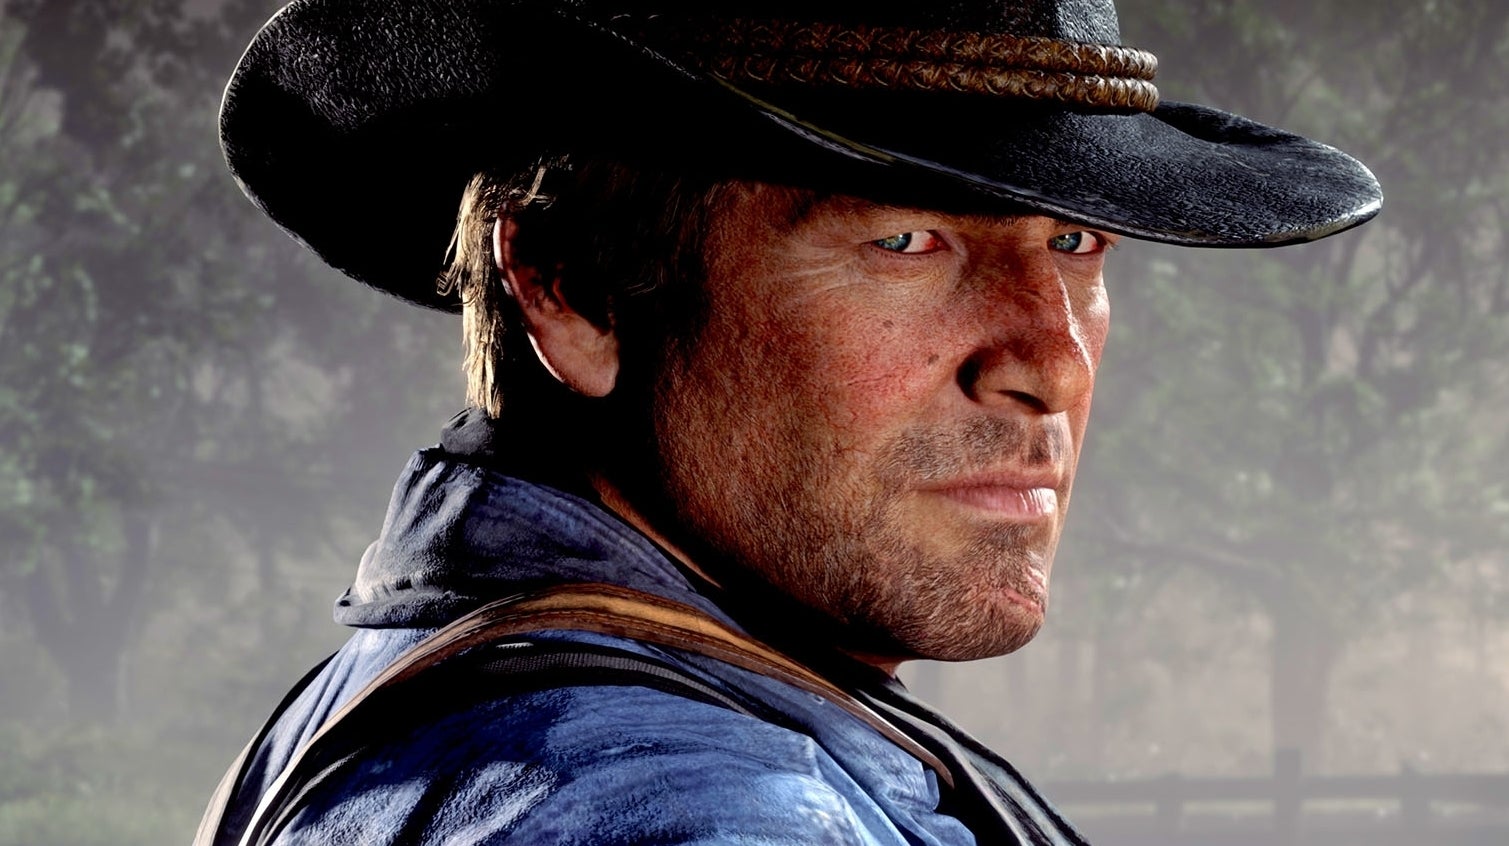 Red Dead Redemption 2: does Stadia live up to its promises? | Eurogamer.net